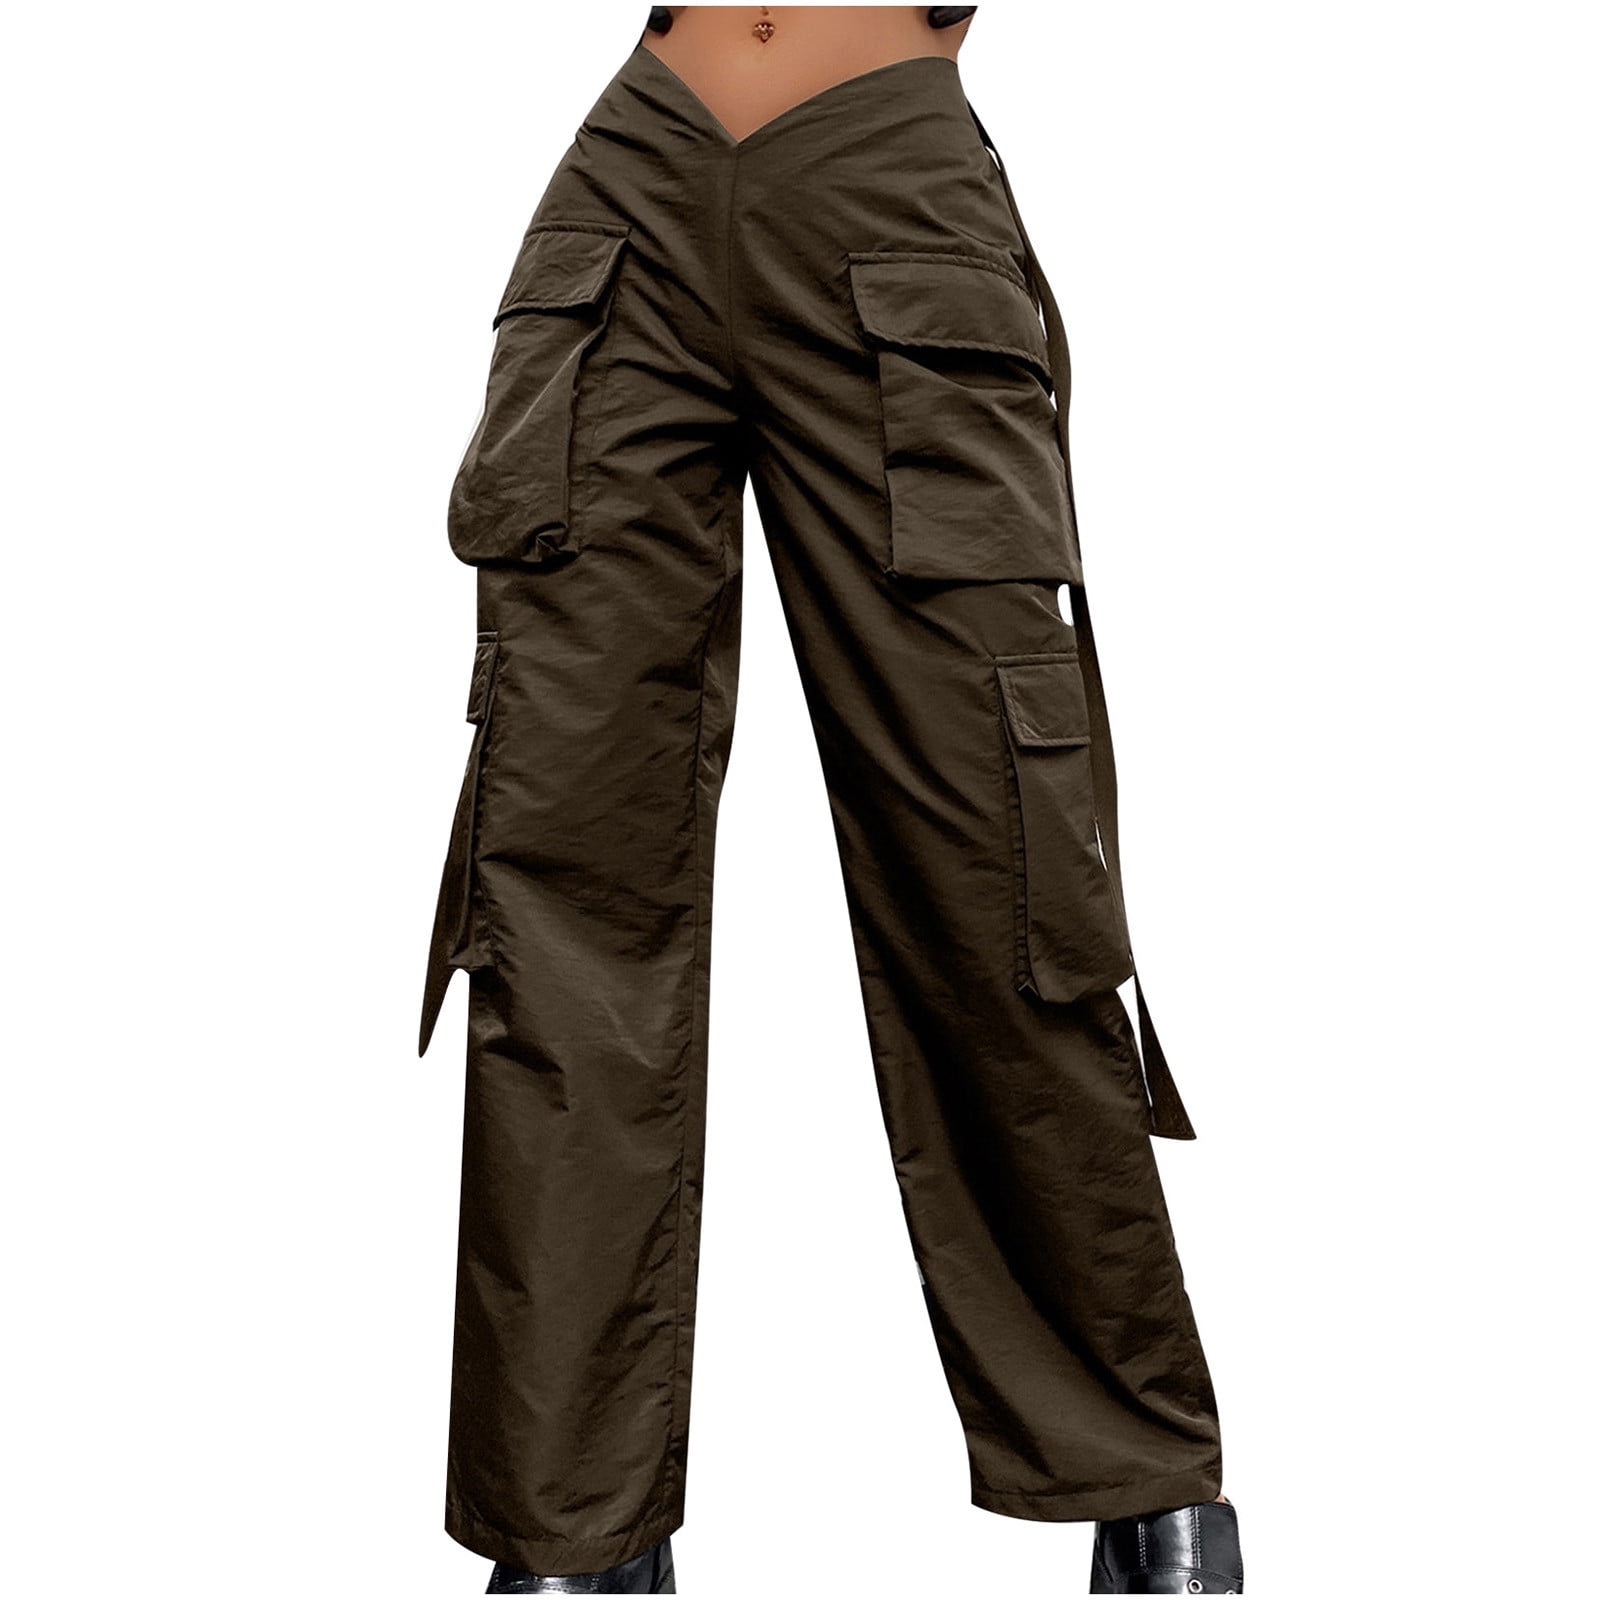 Casual Women's Cargo Pants Lace Up Cool Loose Drawstrings Holes